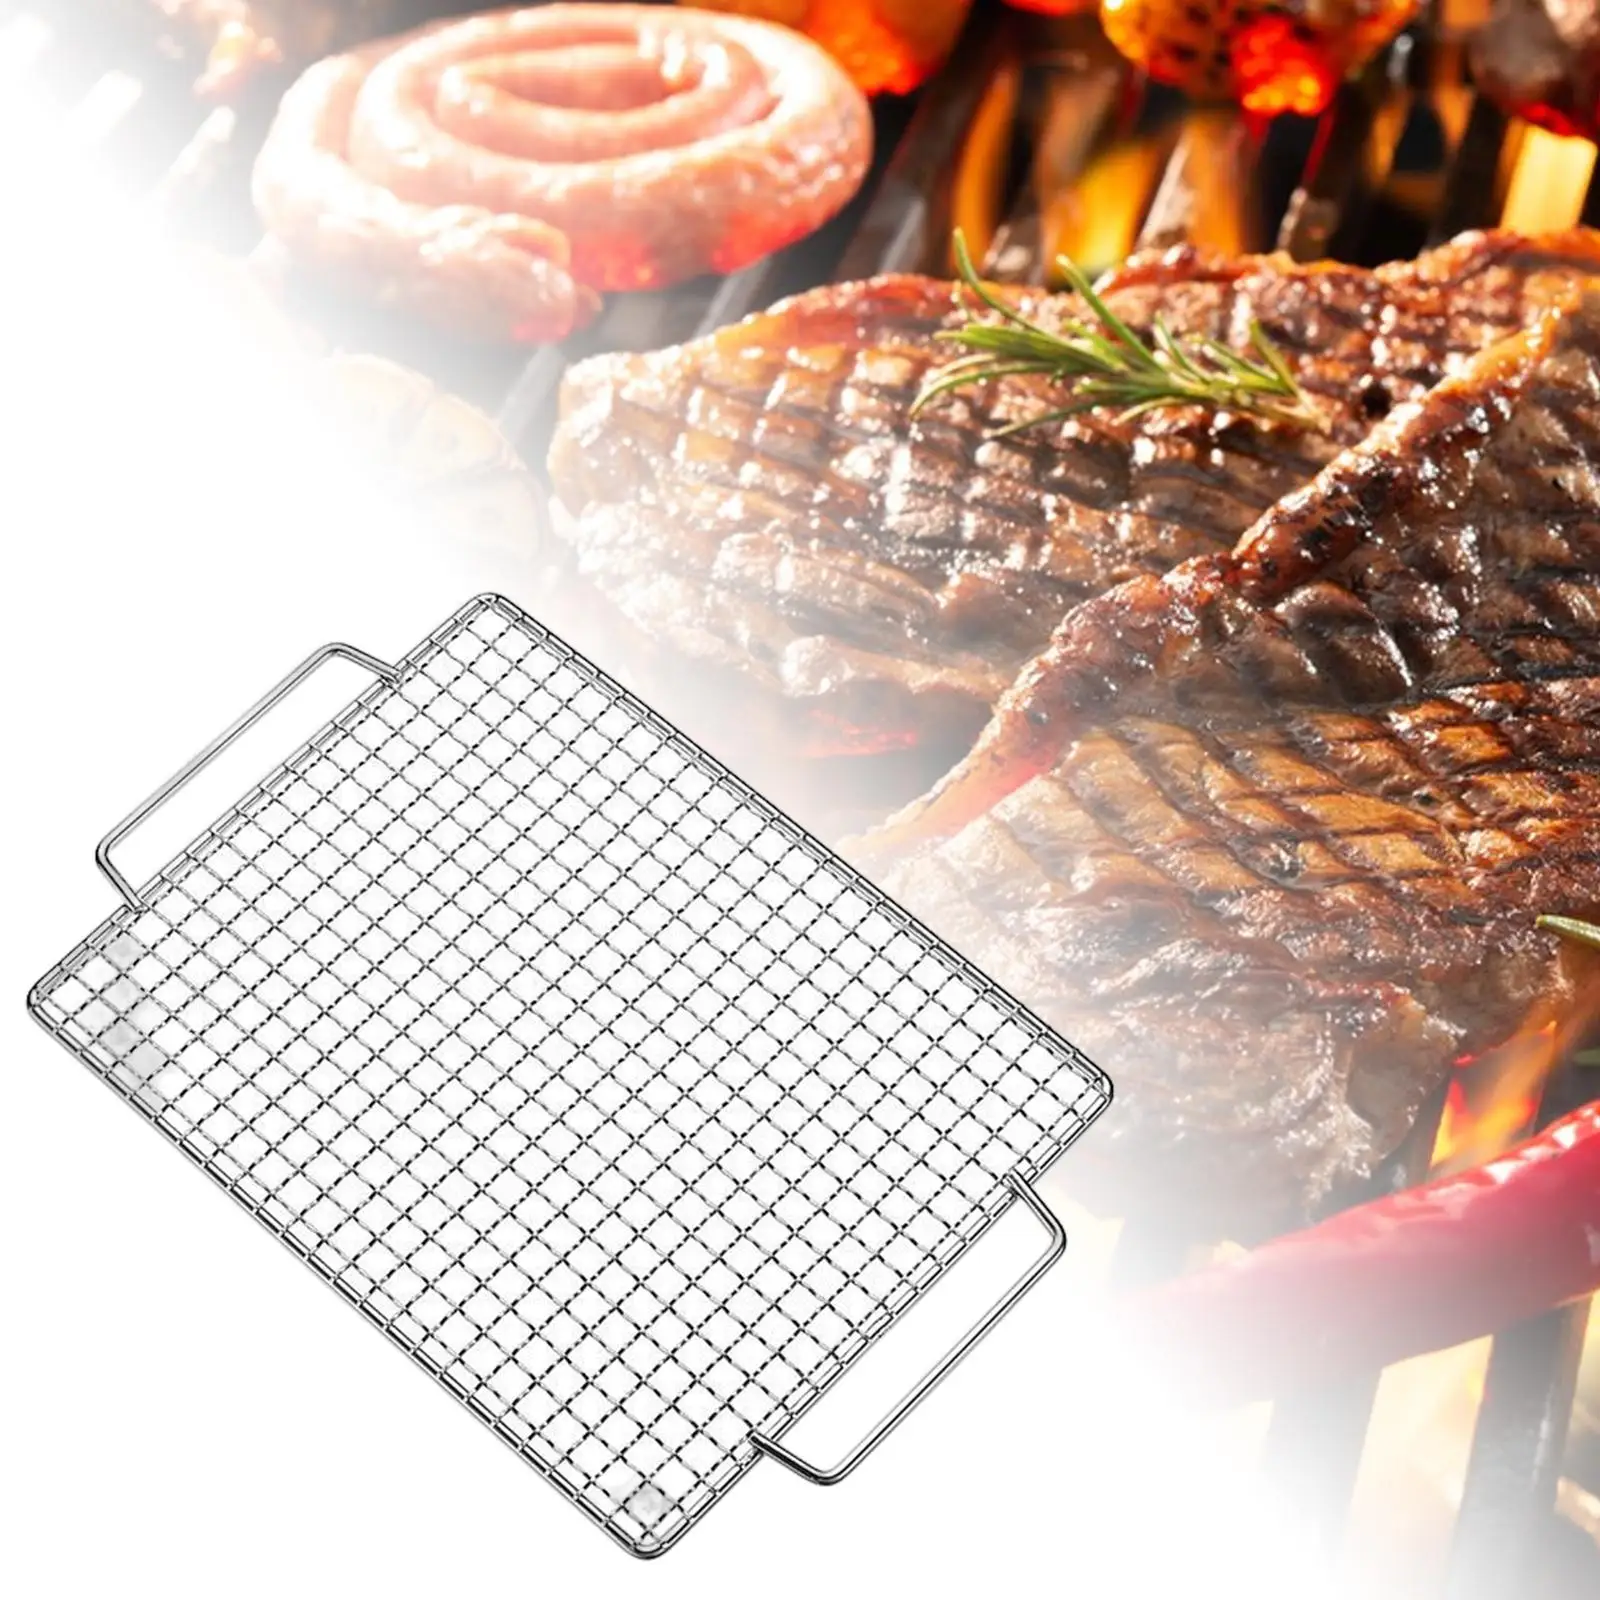 Multipurpose Barbecue Grill Net Mesh Rack for Hiking Camping Accessories